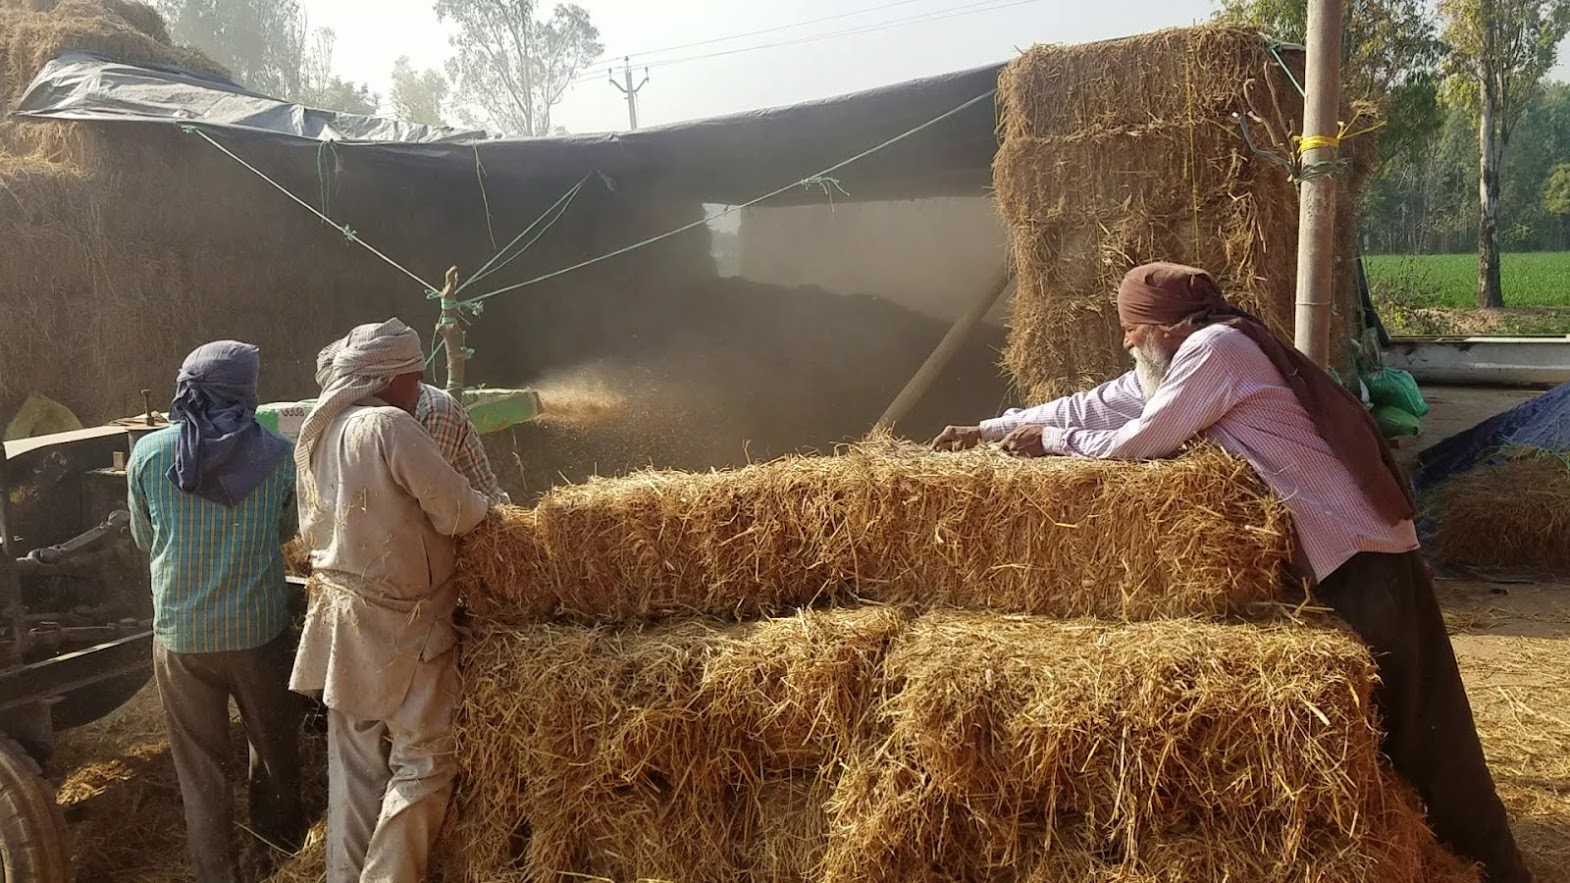 This man’s brilliant idea of converting straw into fuel and other eco-products could end the problem of stubble burning in India